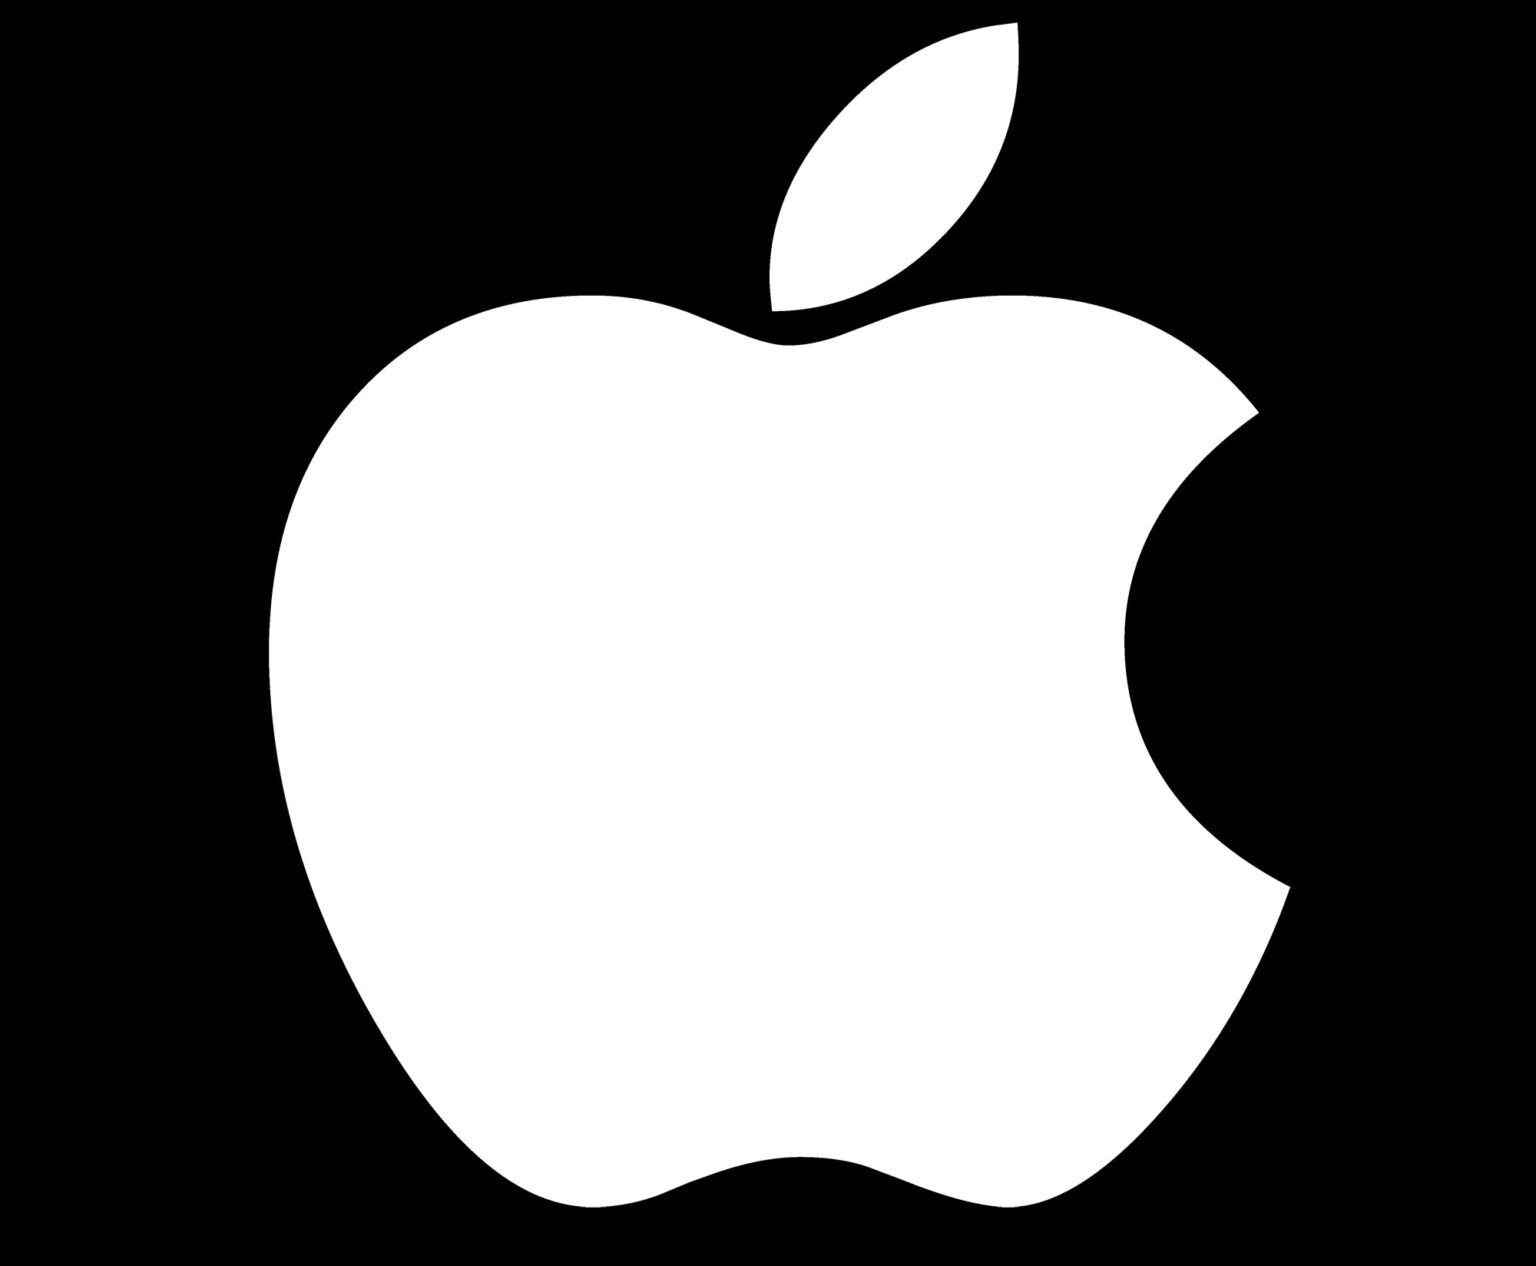 Why Does the Apple Logo Has a Bite Taken Out of it? - Gadget Insiders